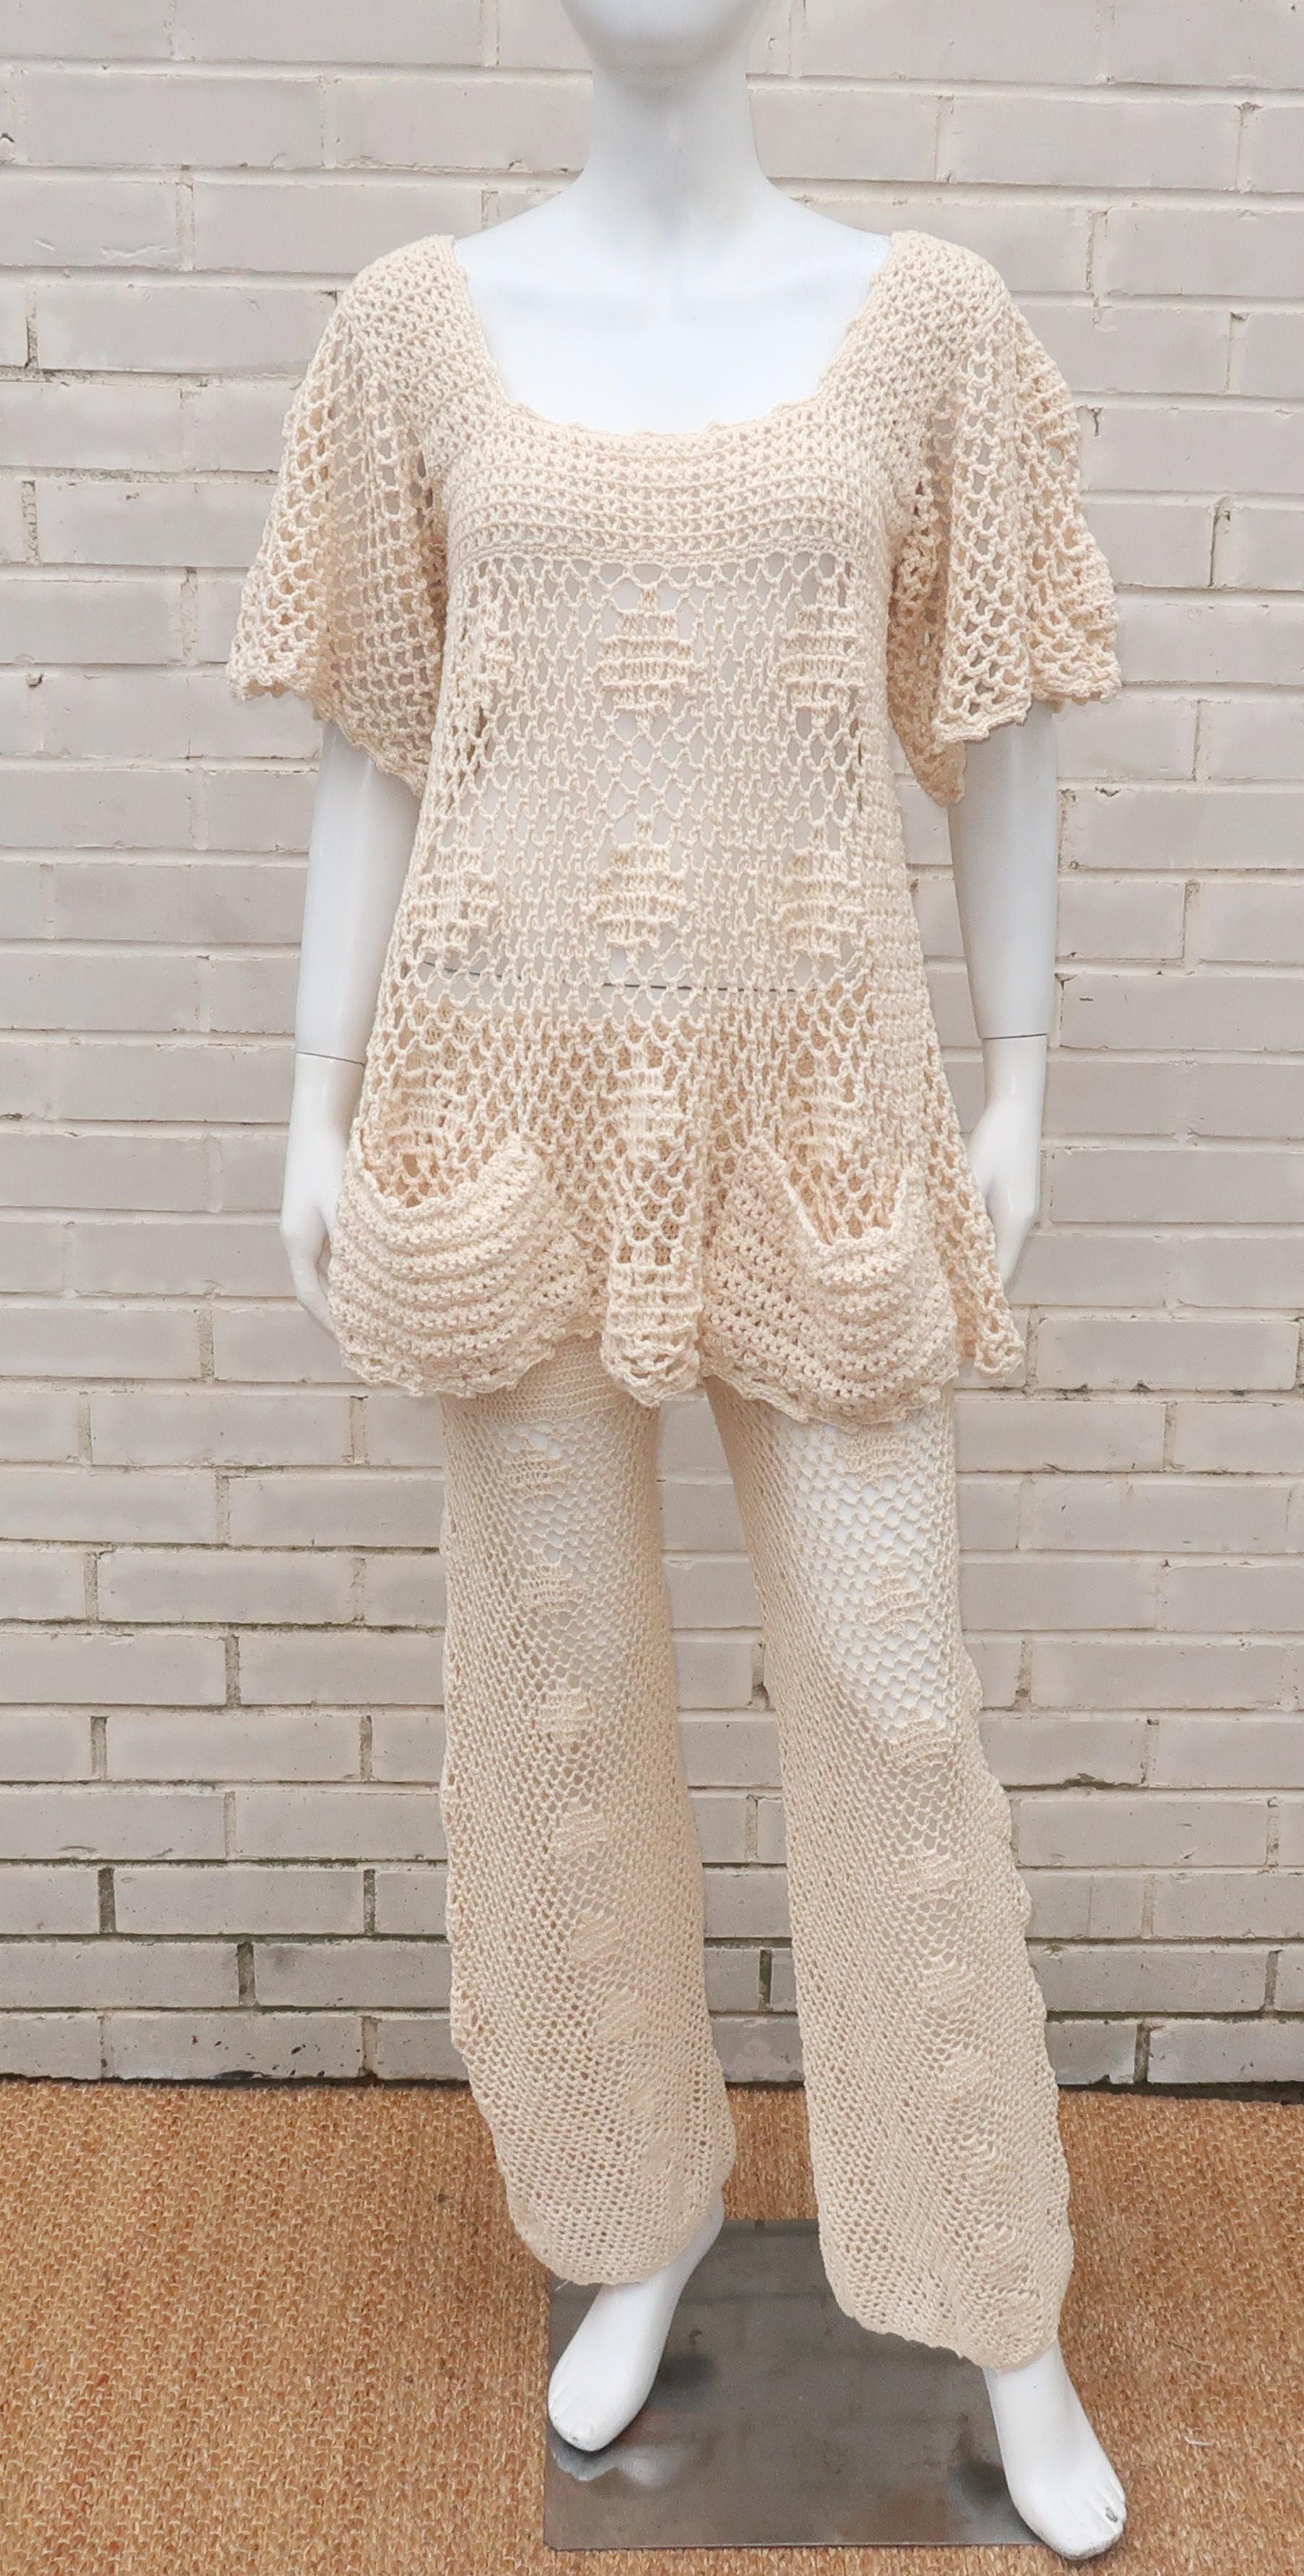 German-American designer, Greta Plattry, first became known in the fashion industry during the 1940's with her unique crocheted clothing and accessories sold through Saks Fifth Avenue.  This two piece 1960's ensemble consisting of top and pants has